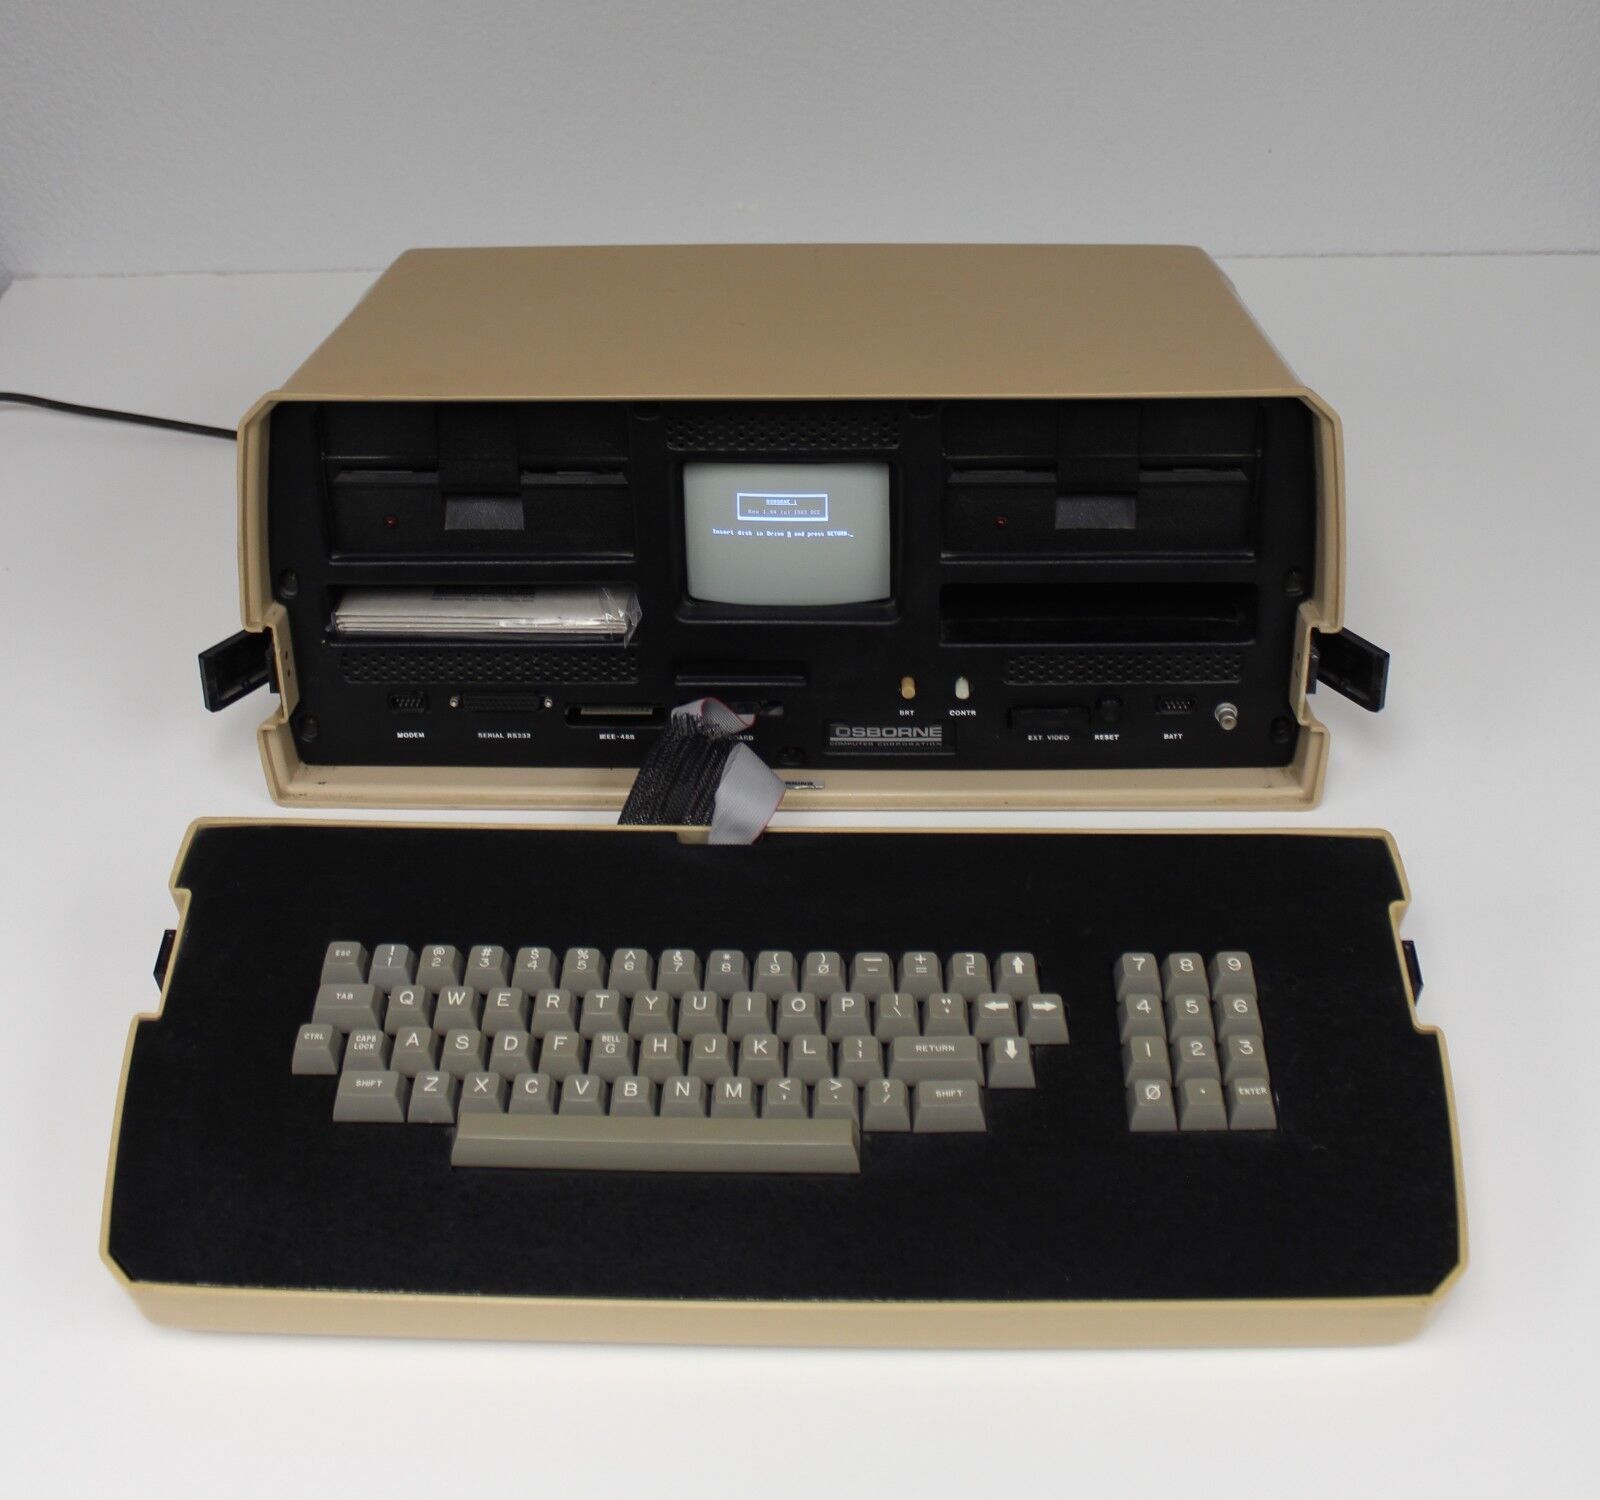 THE Osborne 1 Computer Serial # A00025 - LOWEST KNOWN SERIAL NUMBER IN EXISTENCE